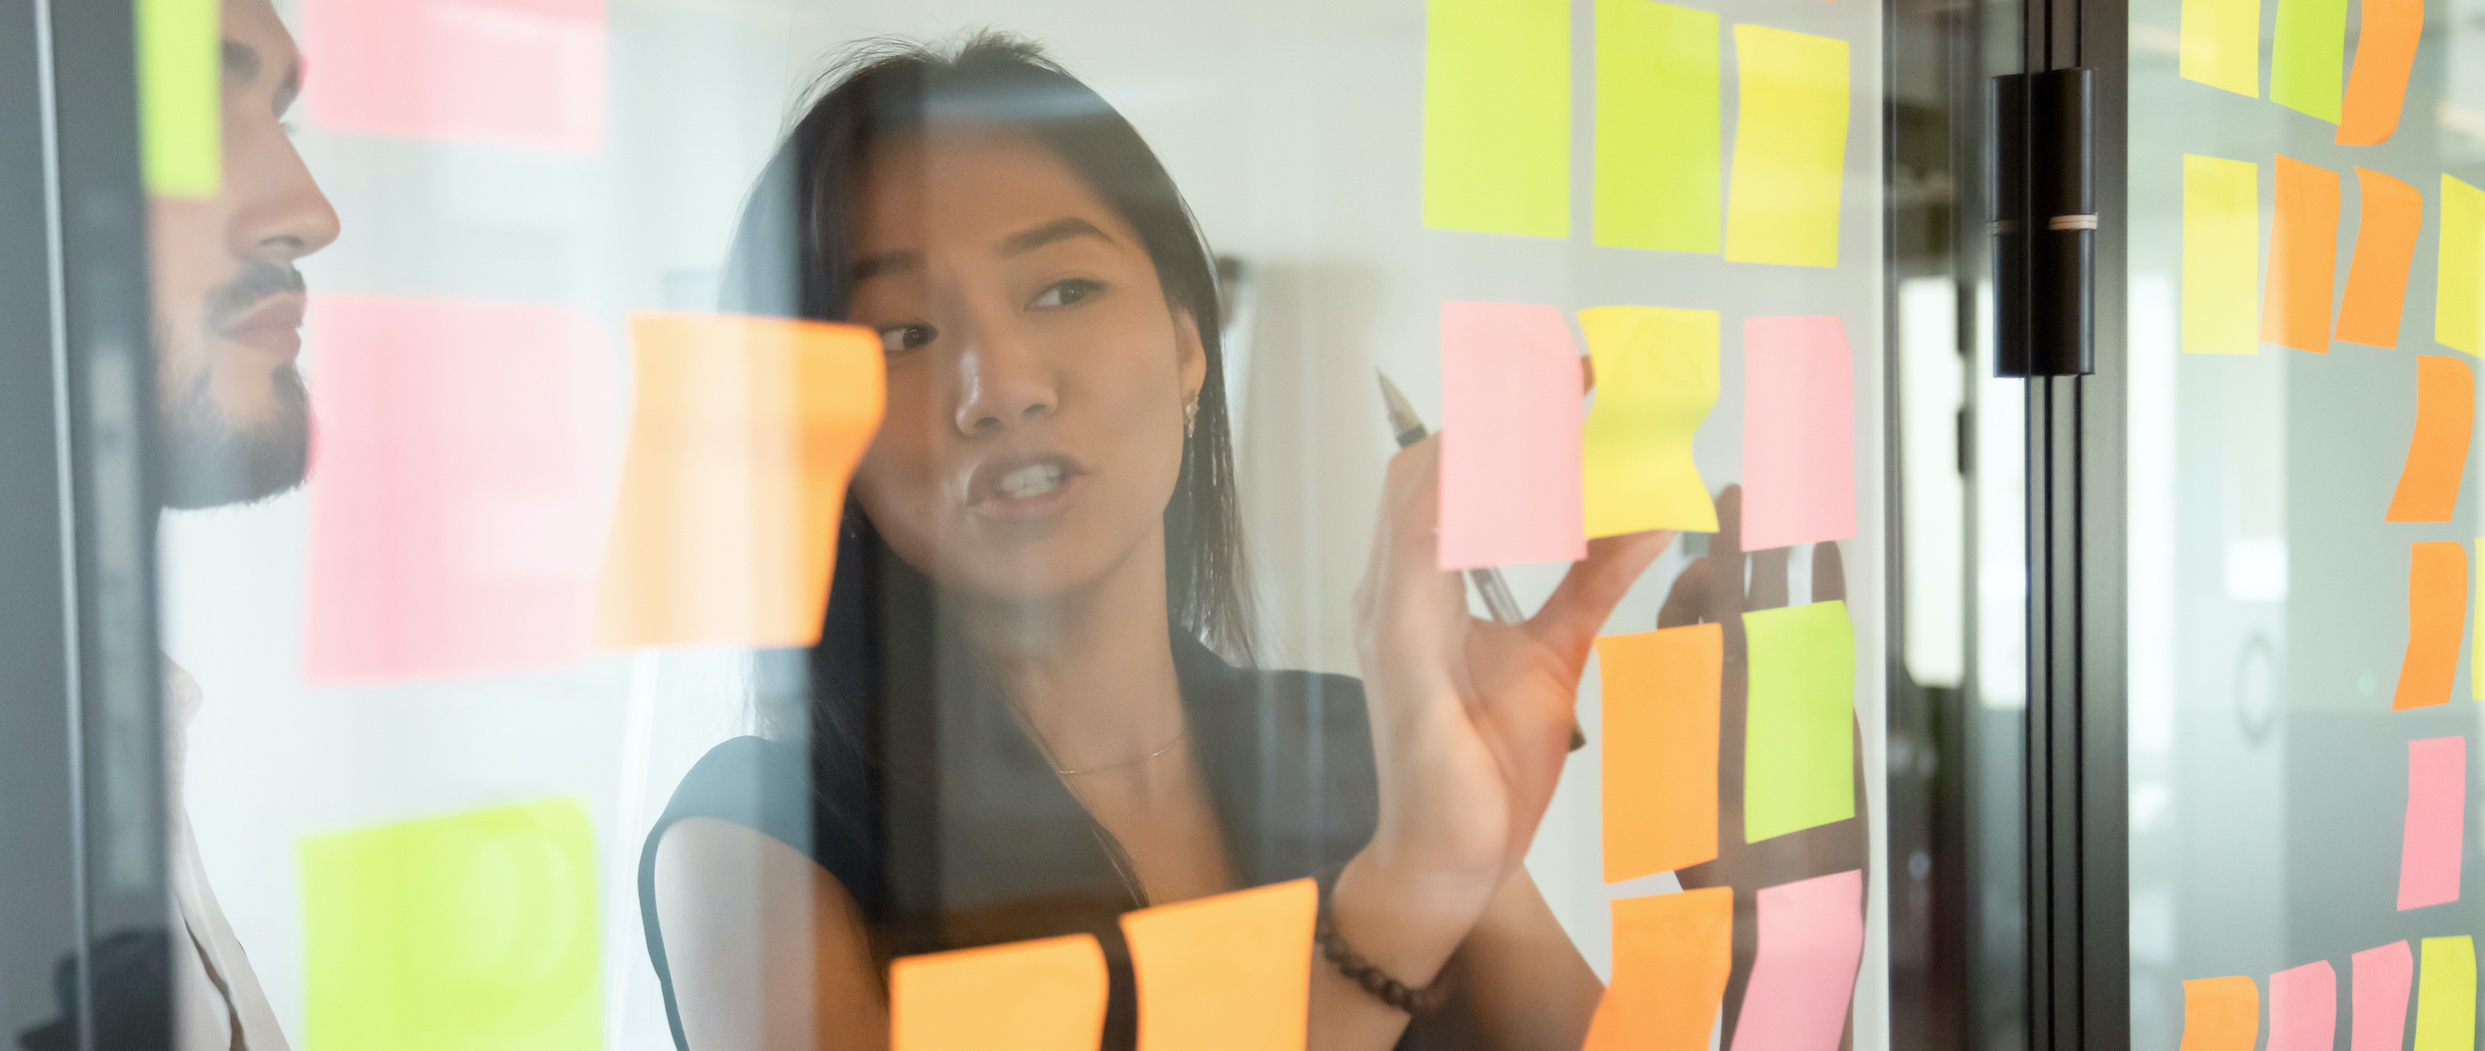  A woman standing in front of a glass board adorned with sticky notes.